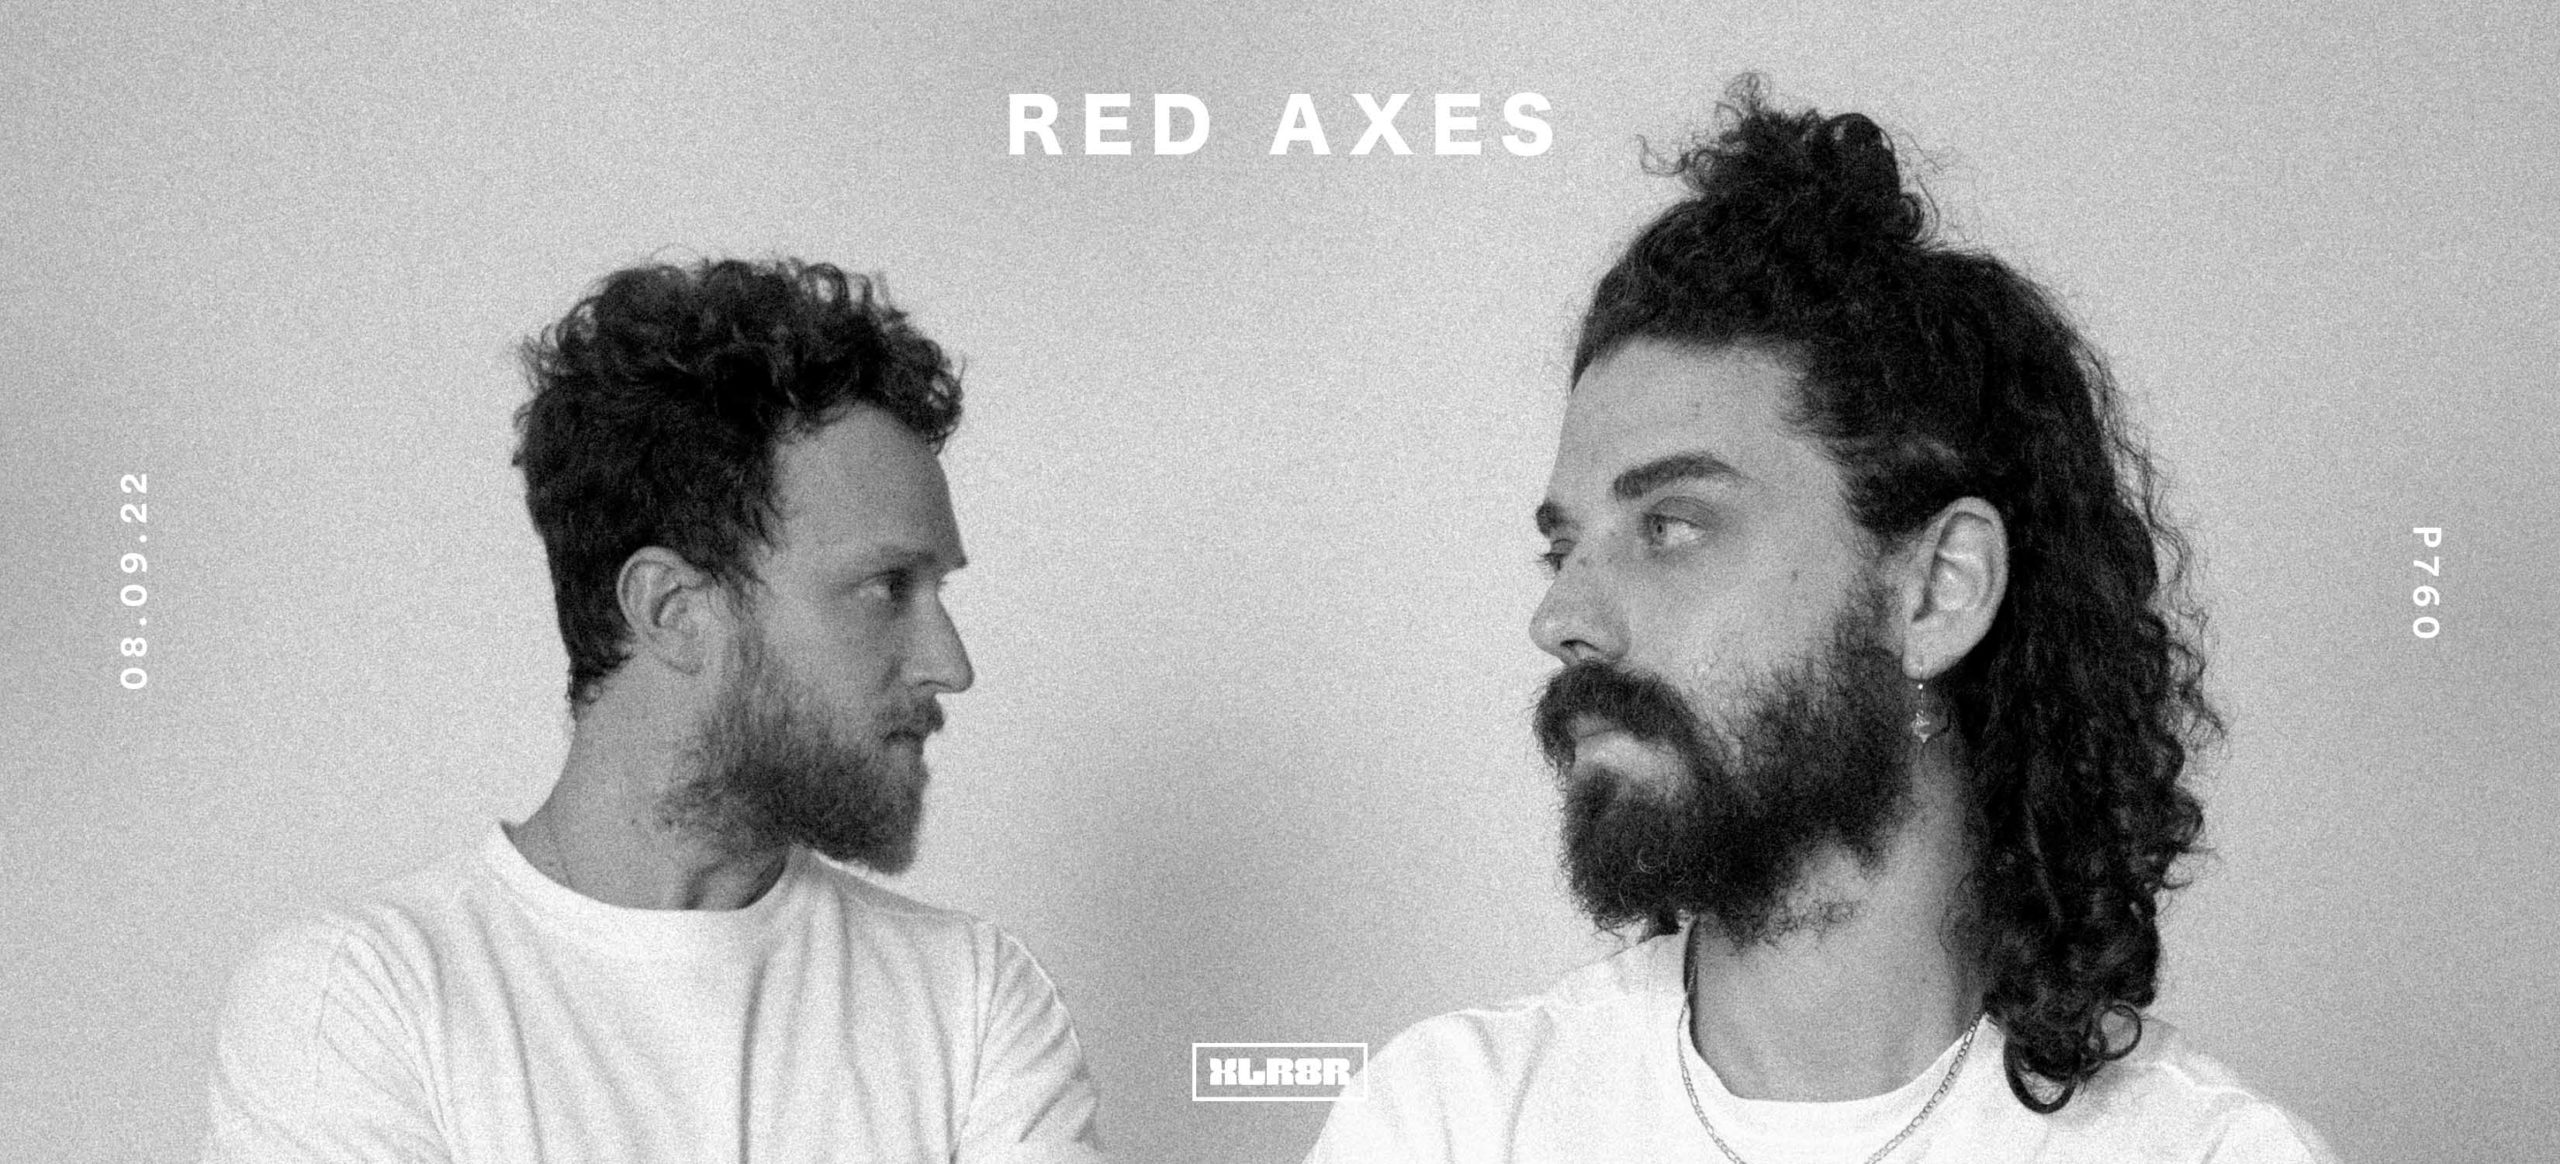 Podcast 760: Red AxesPodcast 760: Red Axes